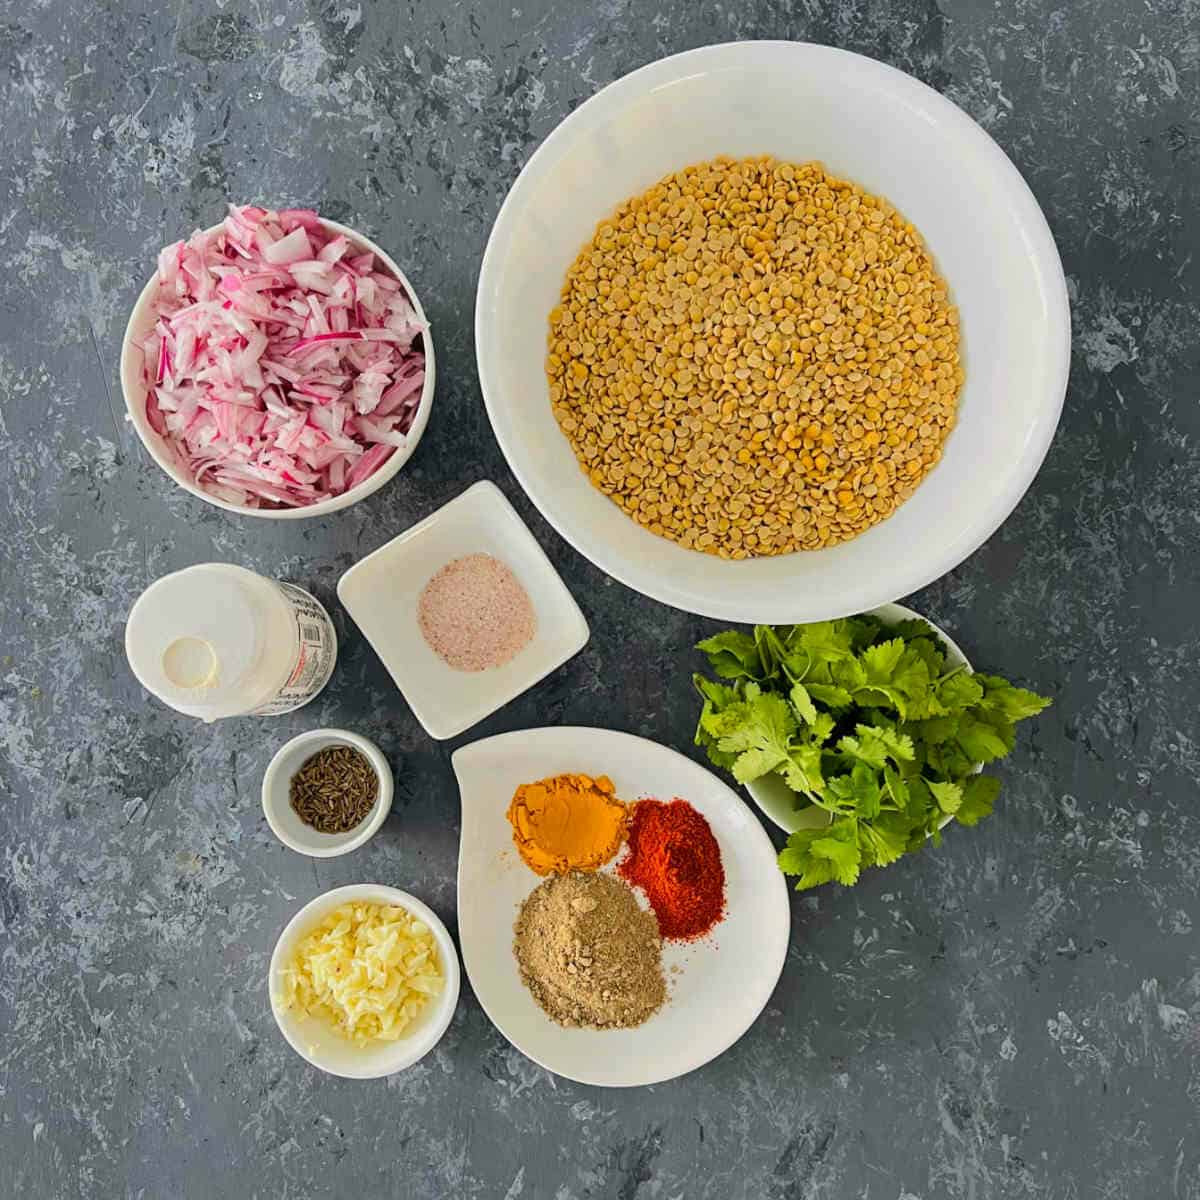 ingredients to make dal fry in an instant pot.